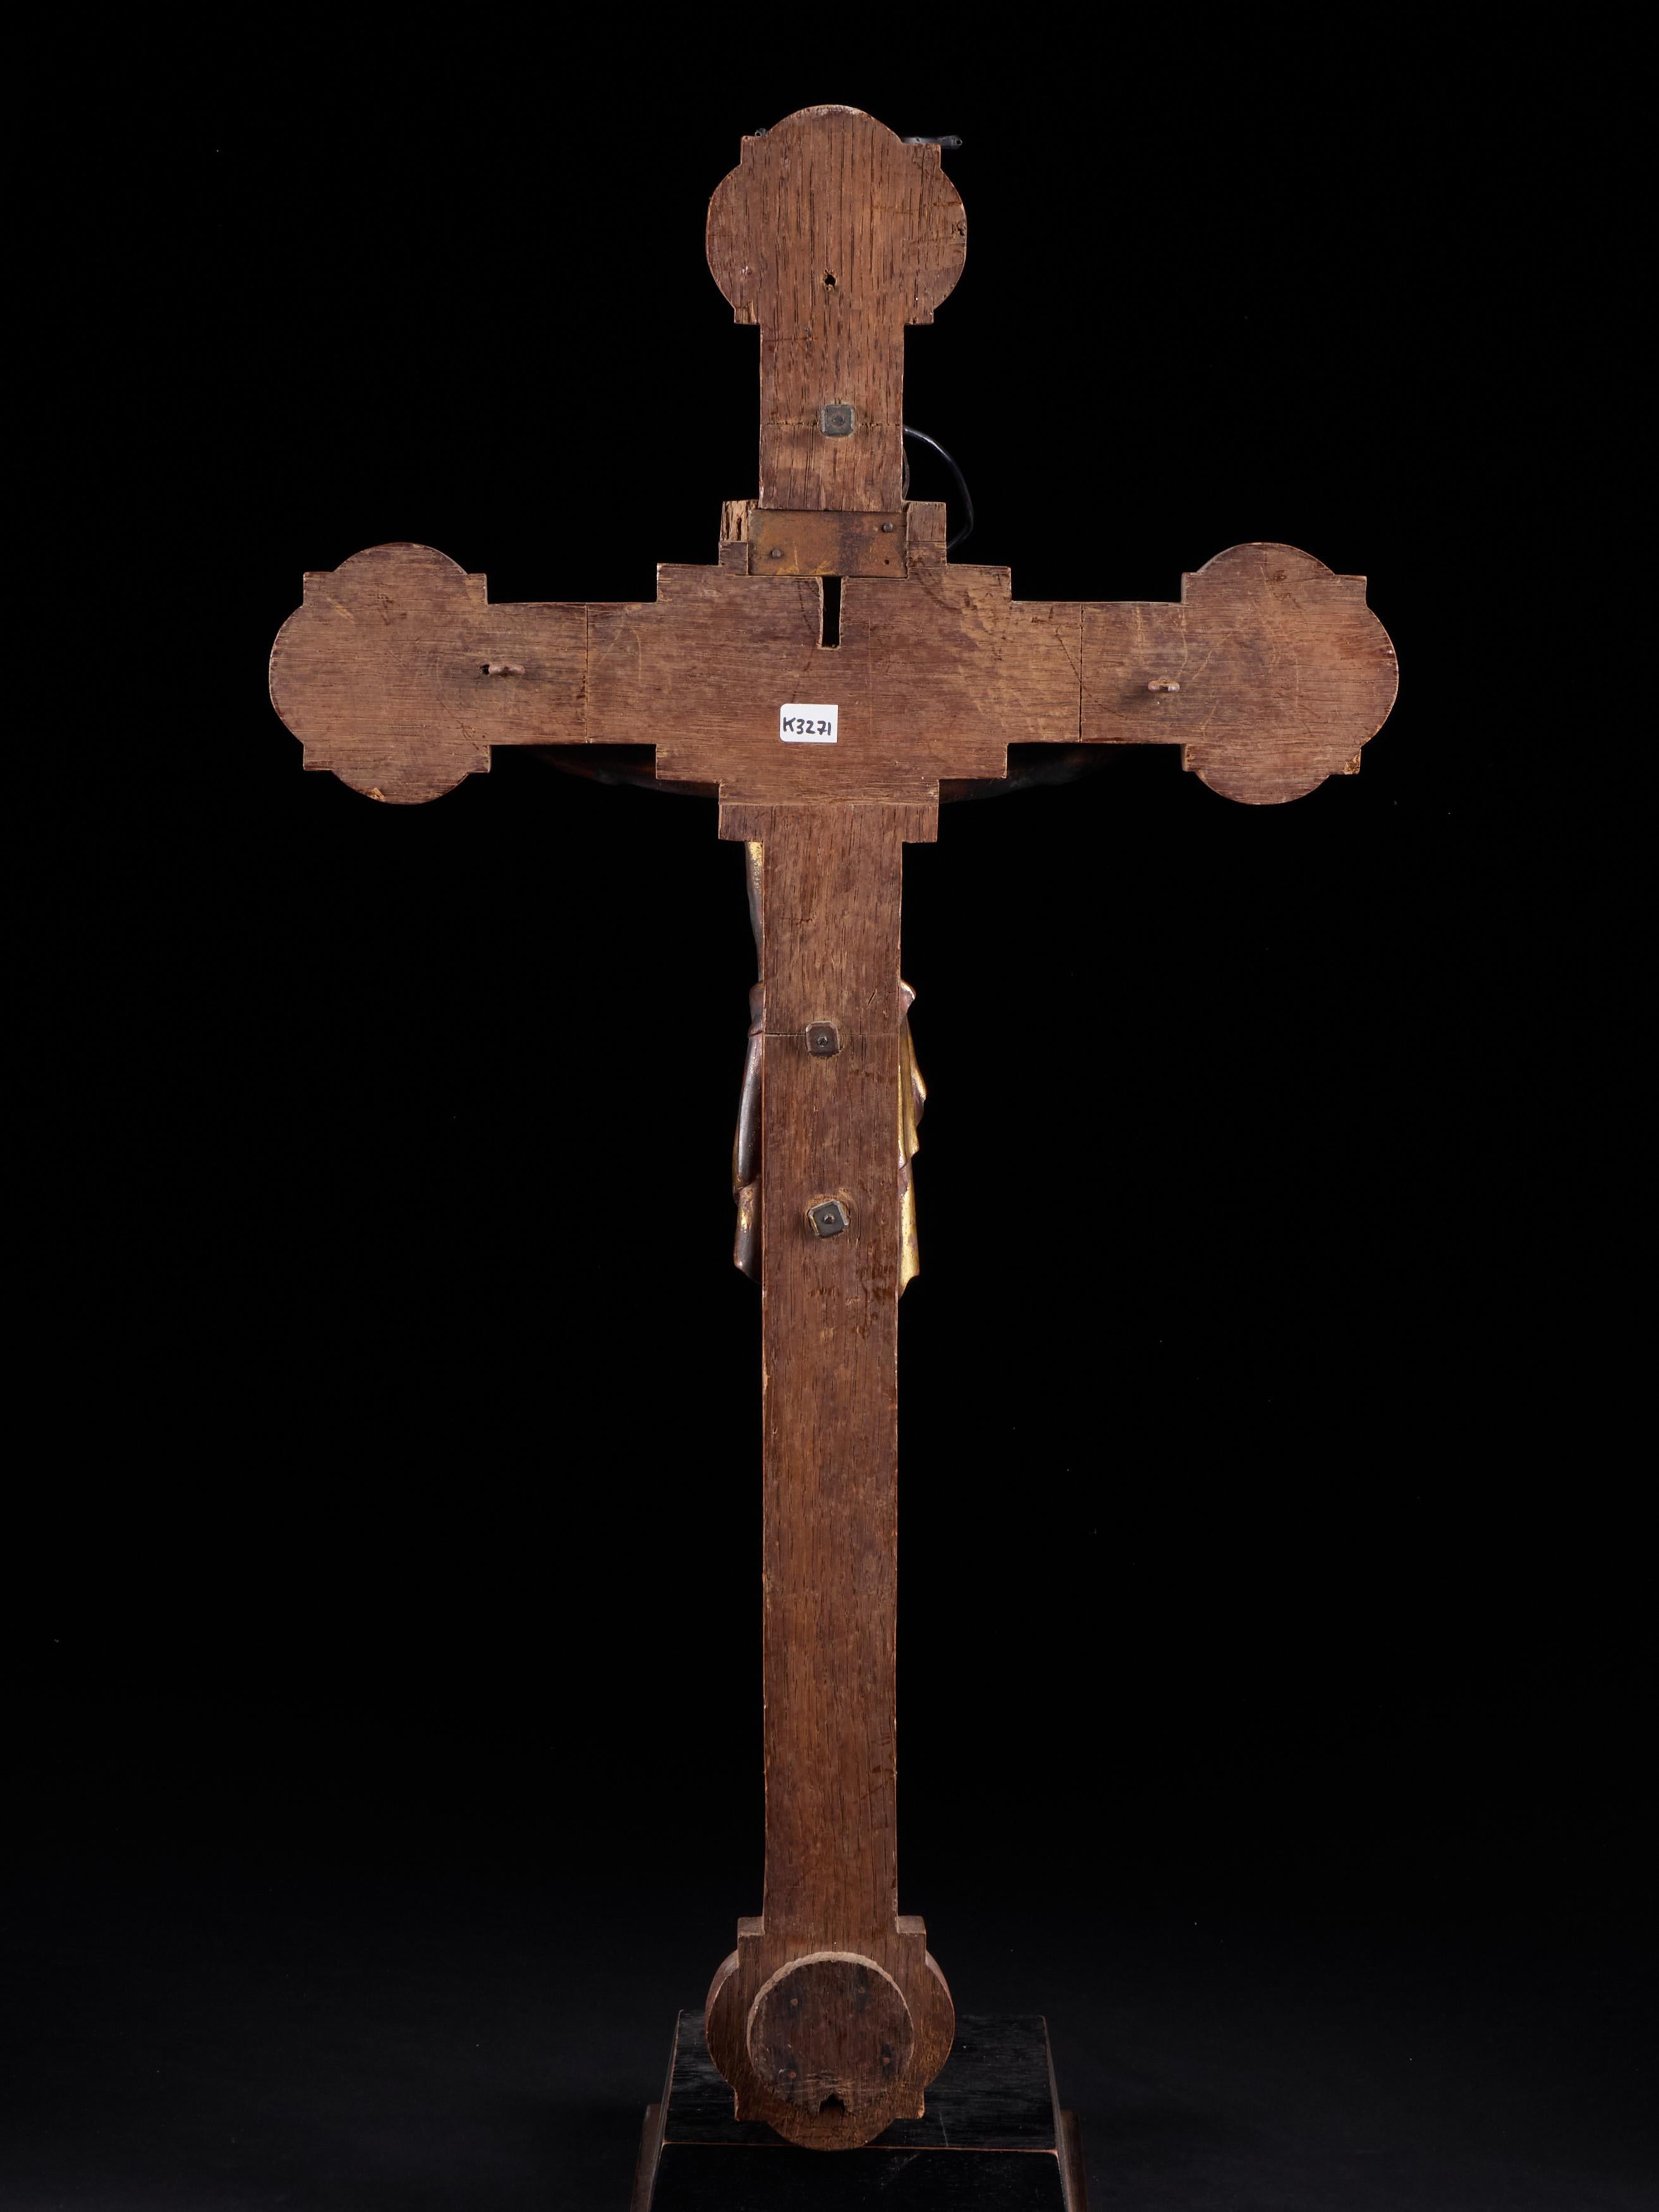 Vintage wooden cross with a nice patina and an exquisite shape. This item depicts the Christ in his last agony on the cross, after being crucified.